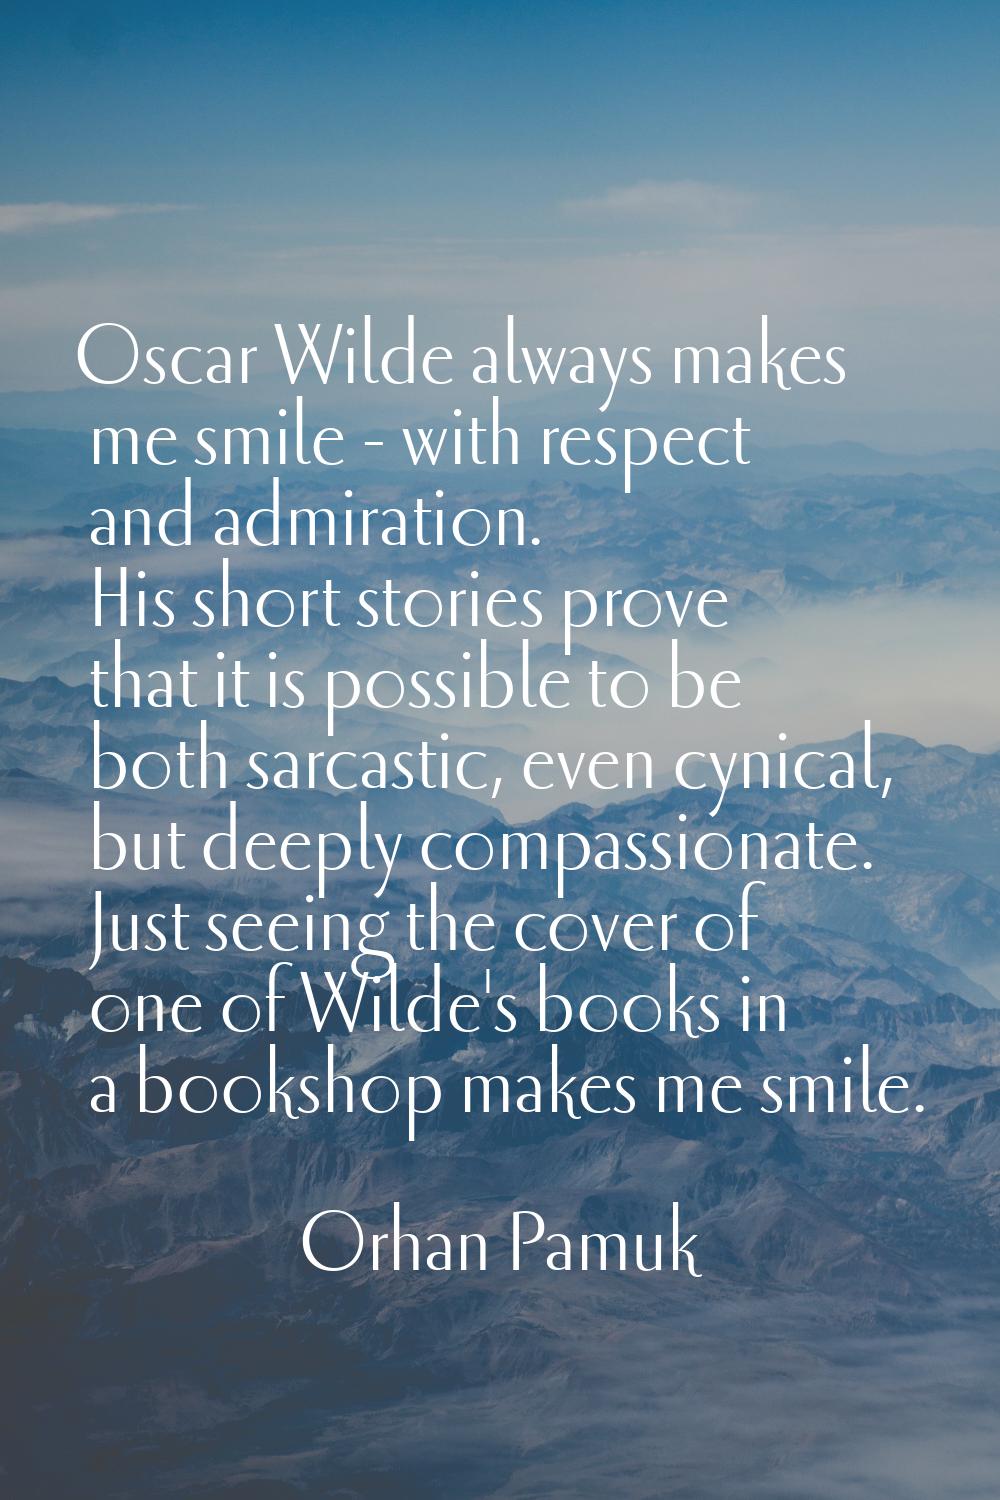 Oscar Wilde always makes me smile - with respect and admiration. His short stories prove that it is